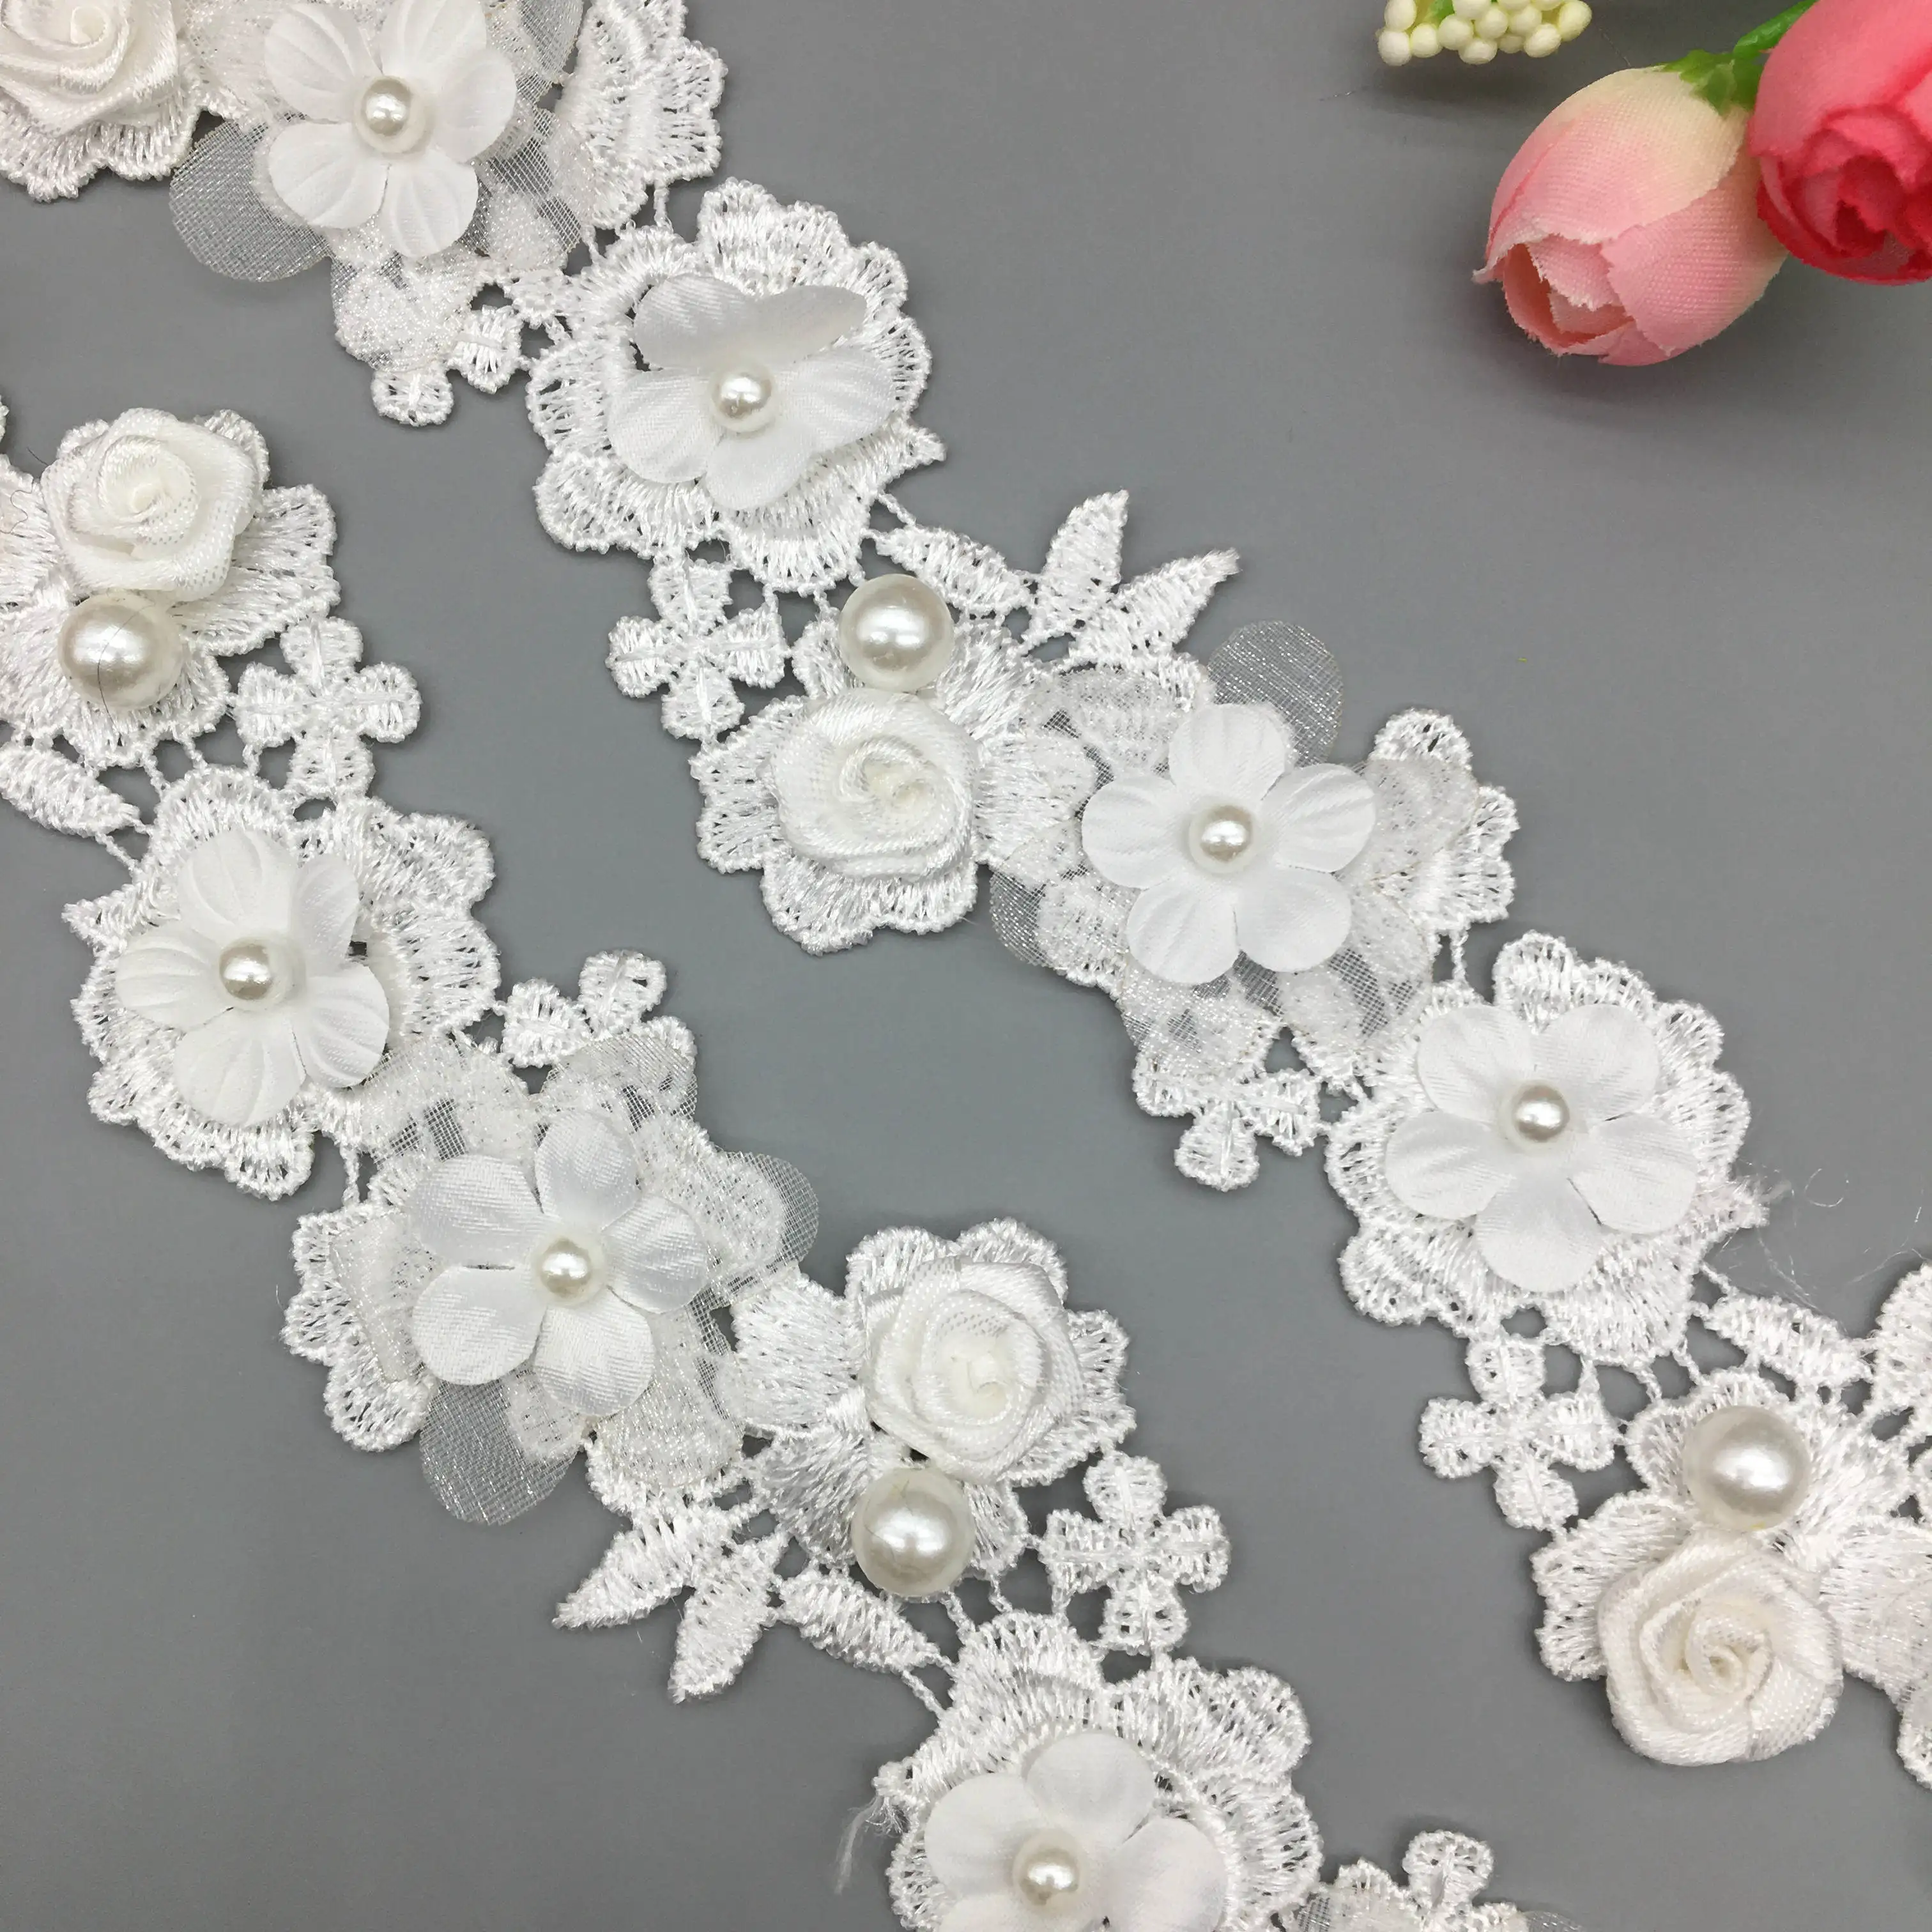 1 Yd Rose Flower Pearl Embroidered Lace Trim Ribbon Fabric Applique Sewing Craft 